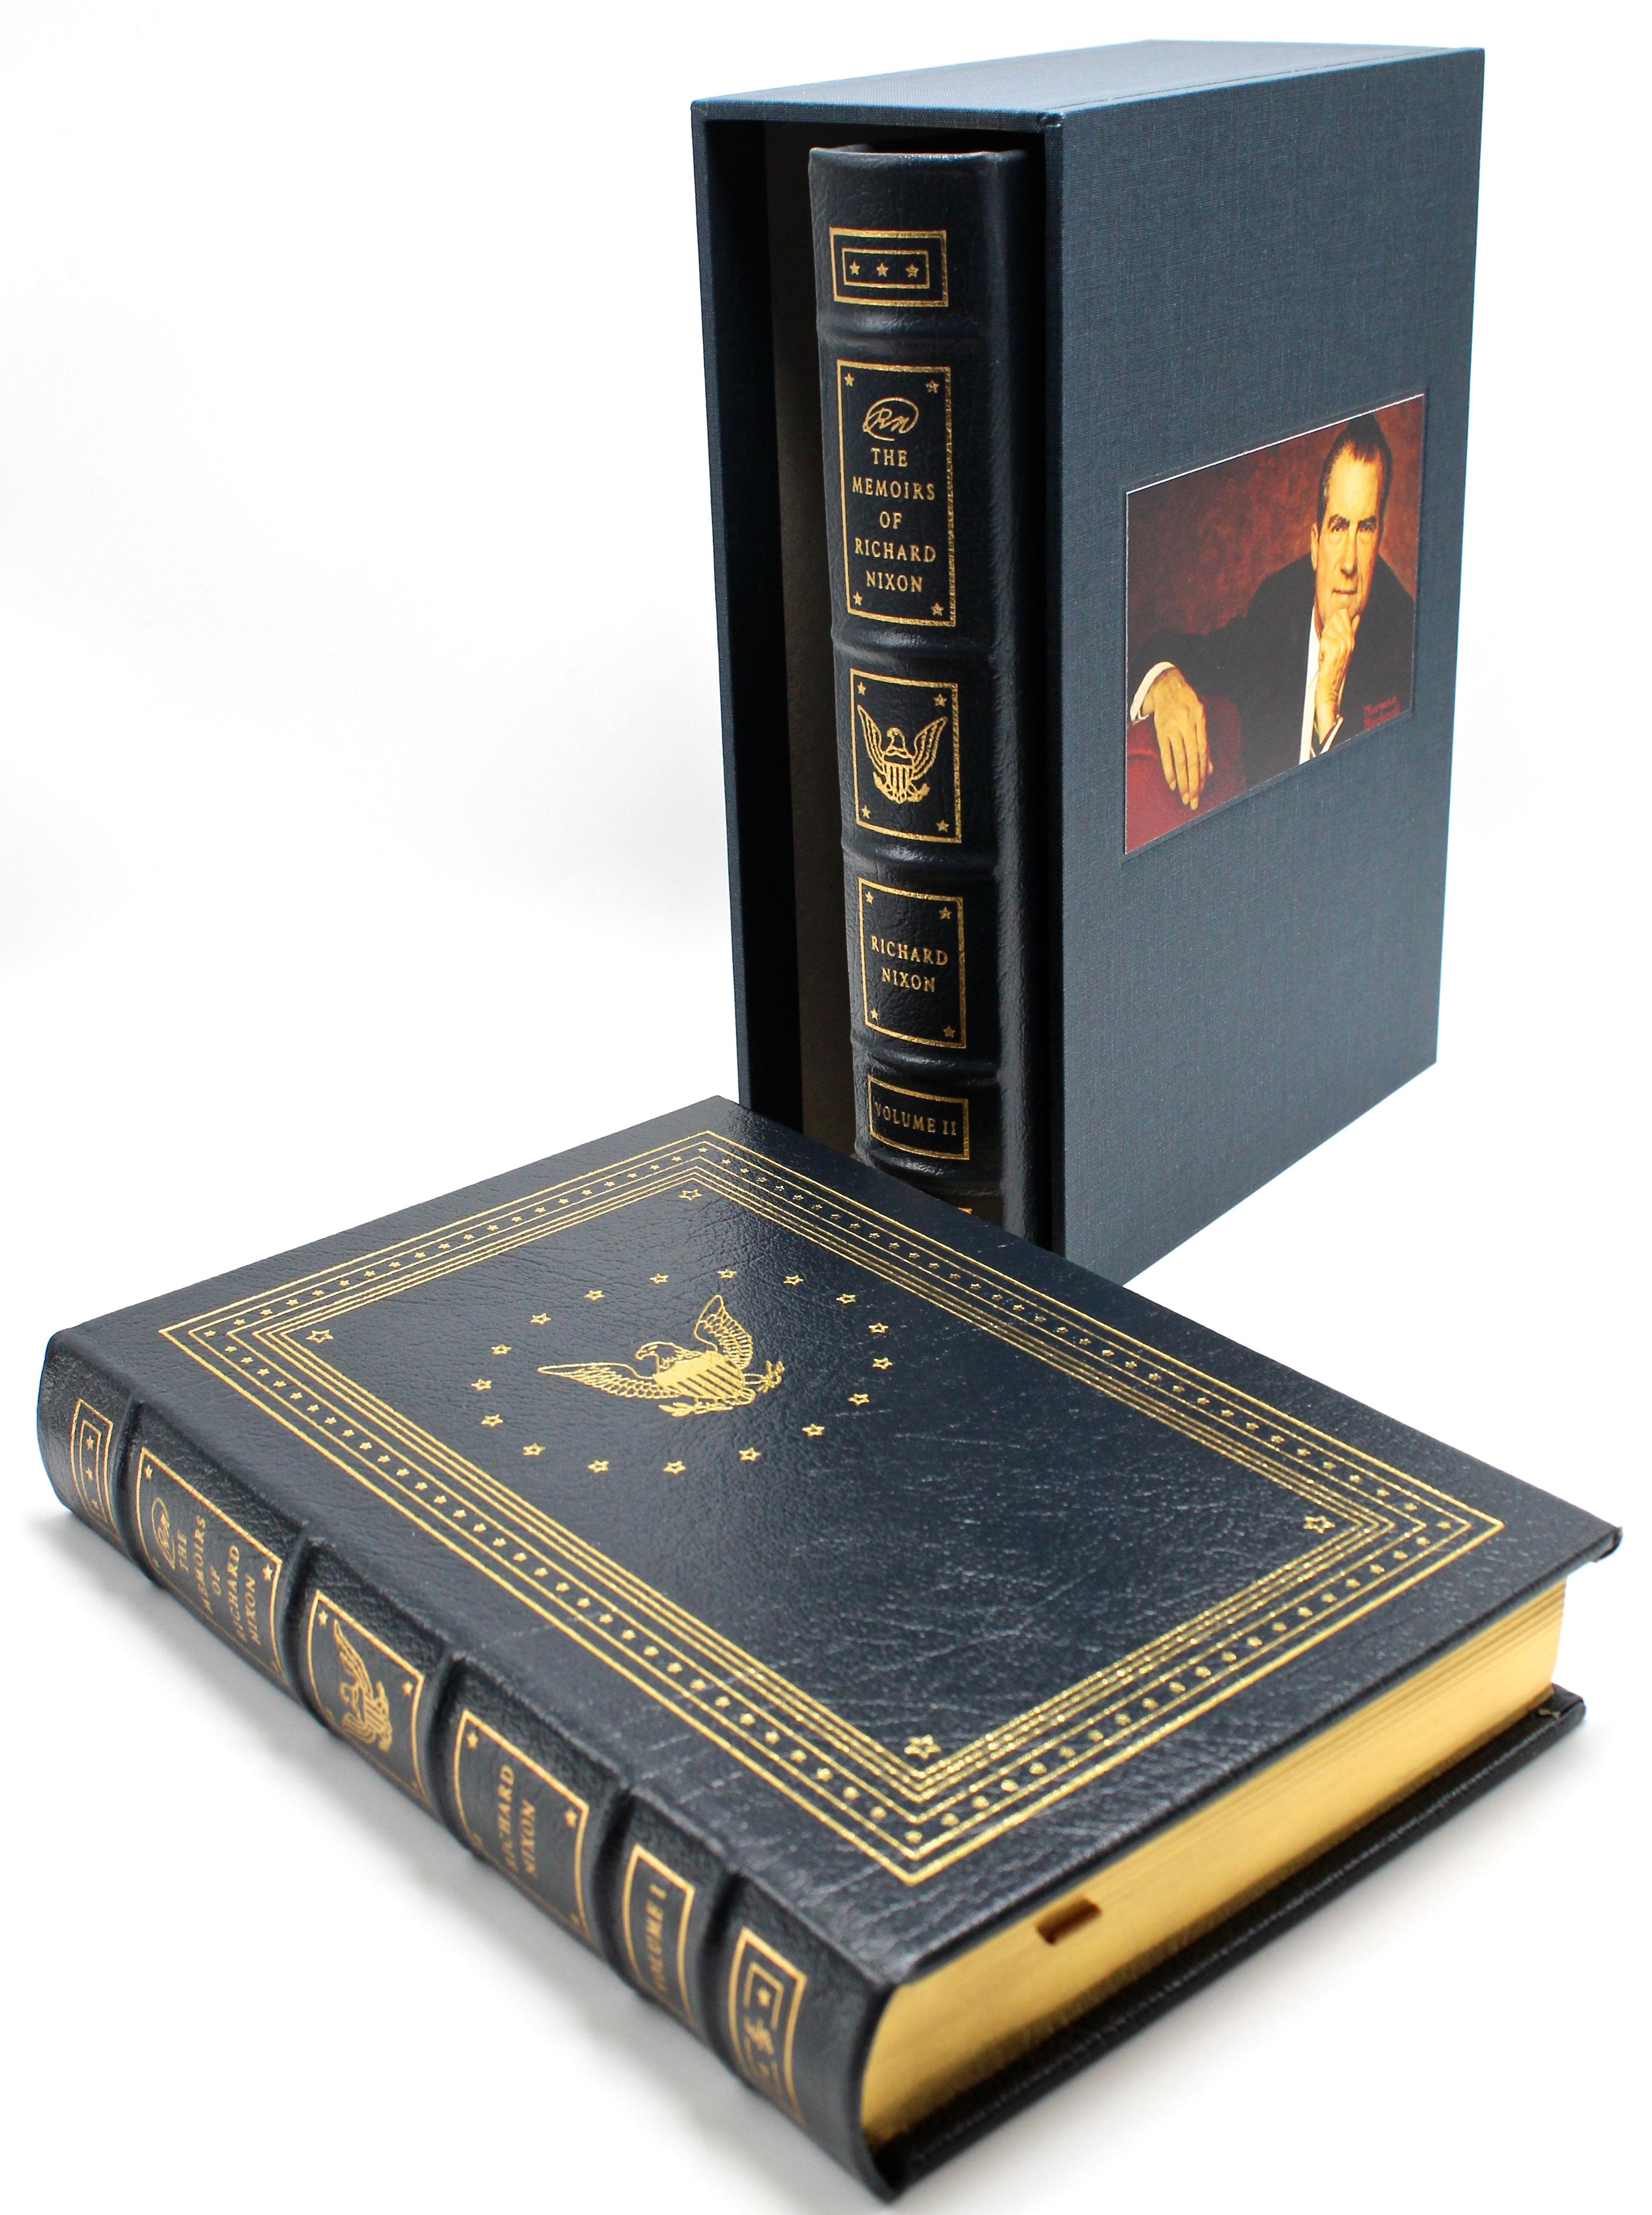 Nixon, Richard. The Memoirs of Richard Nixon. Norwalk: The Easton Press, 1988. Two-volume set. Bound in full leather with 22-karat gold embossing. Housed in a matching custom slipcase.

This two-volume set of The Memoirs of Richard Nixon is bound in